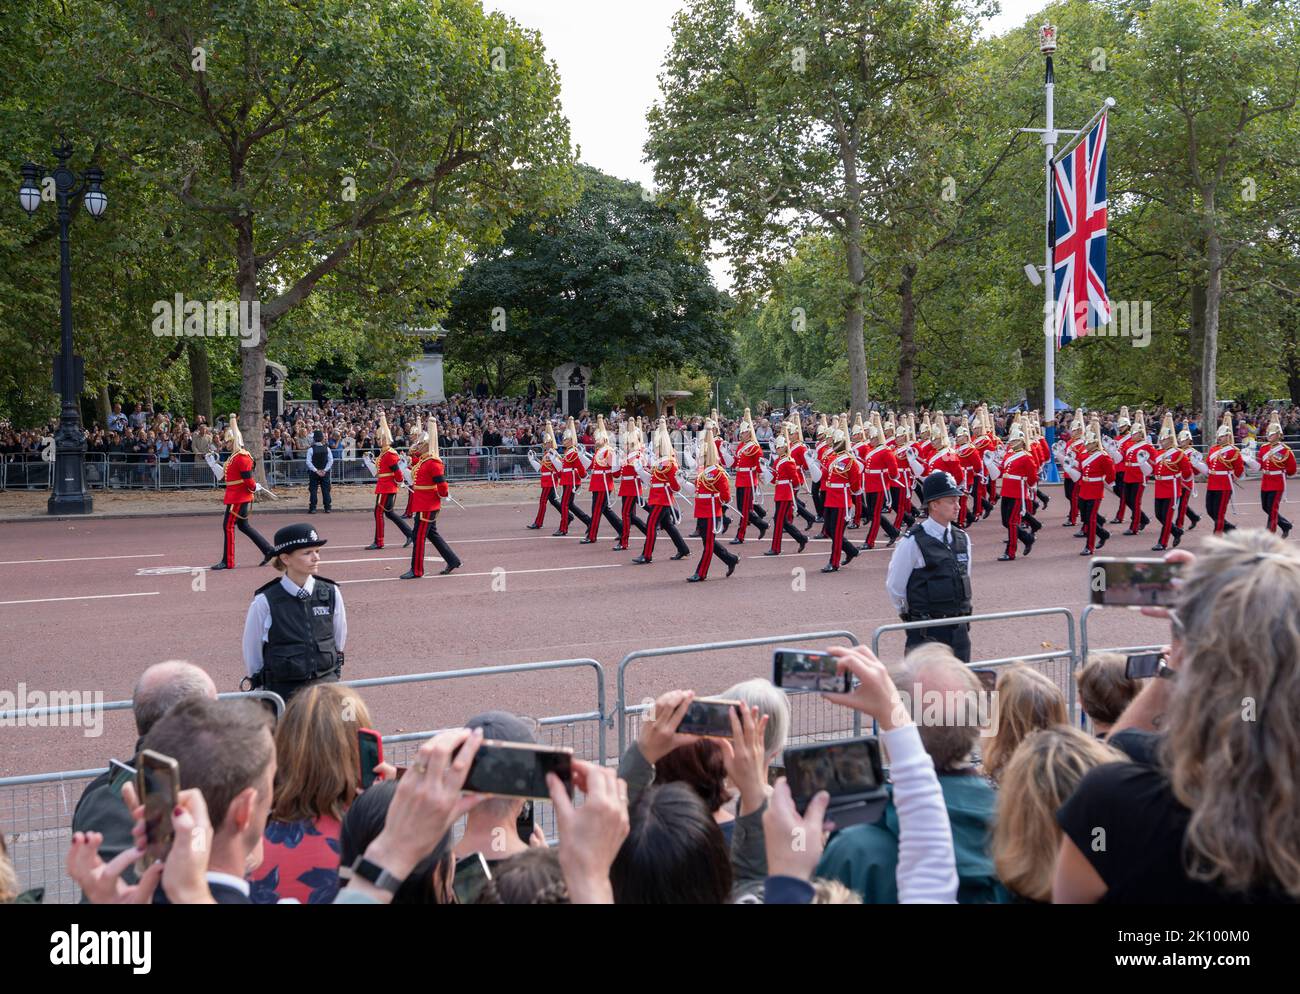 The Mall, London, UK. 14 September 2022. The funeral procession for Queen Elizabeth II moves along The Mall from Buckingham Palace to Westminster Hall where Queen Elizabeth’s body will lie in State until Monday 19 September. Credit: Malcolm Park/Alamy Live News. Stock Photo